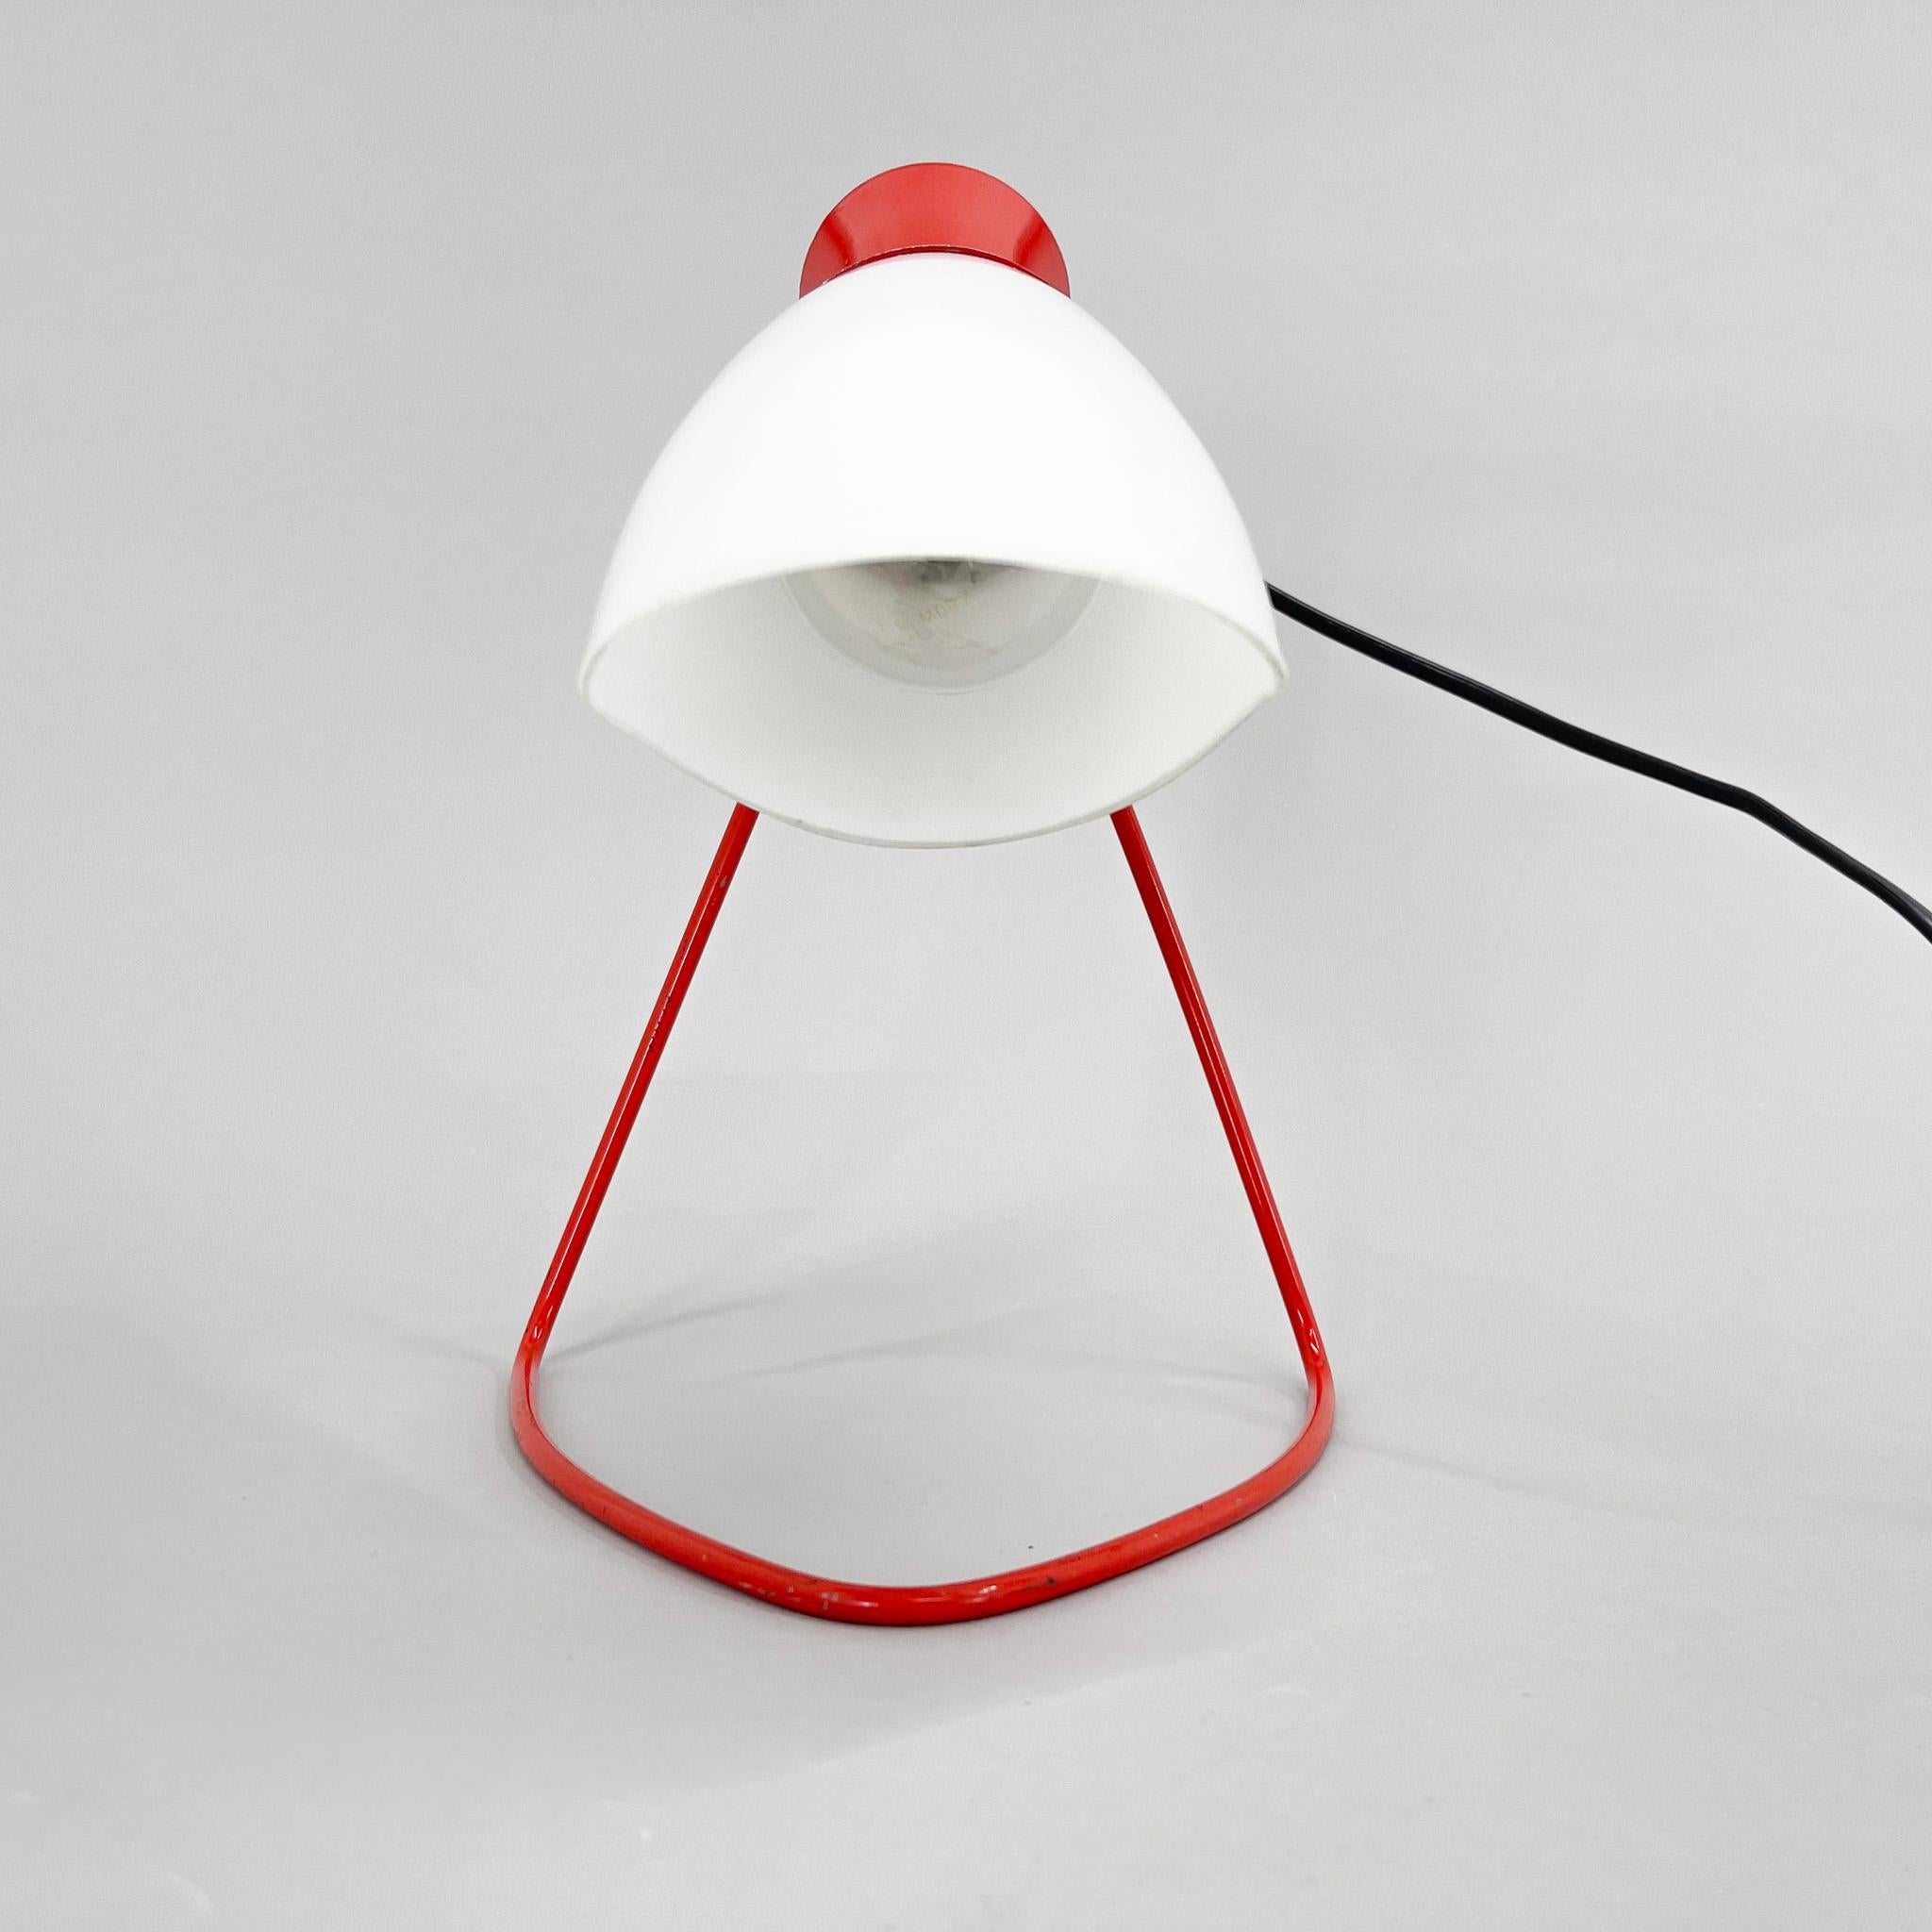 Czech  Mid-Century Table Lamp Designed By Josef Hurka for Napako, Model 1621, 1950's For Sale